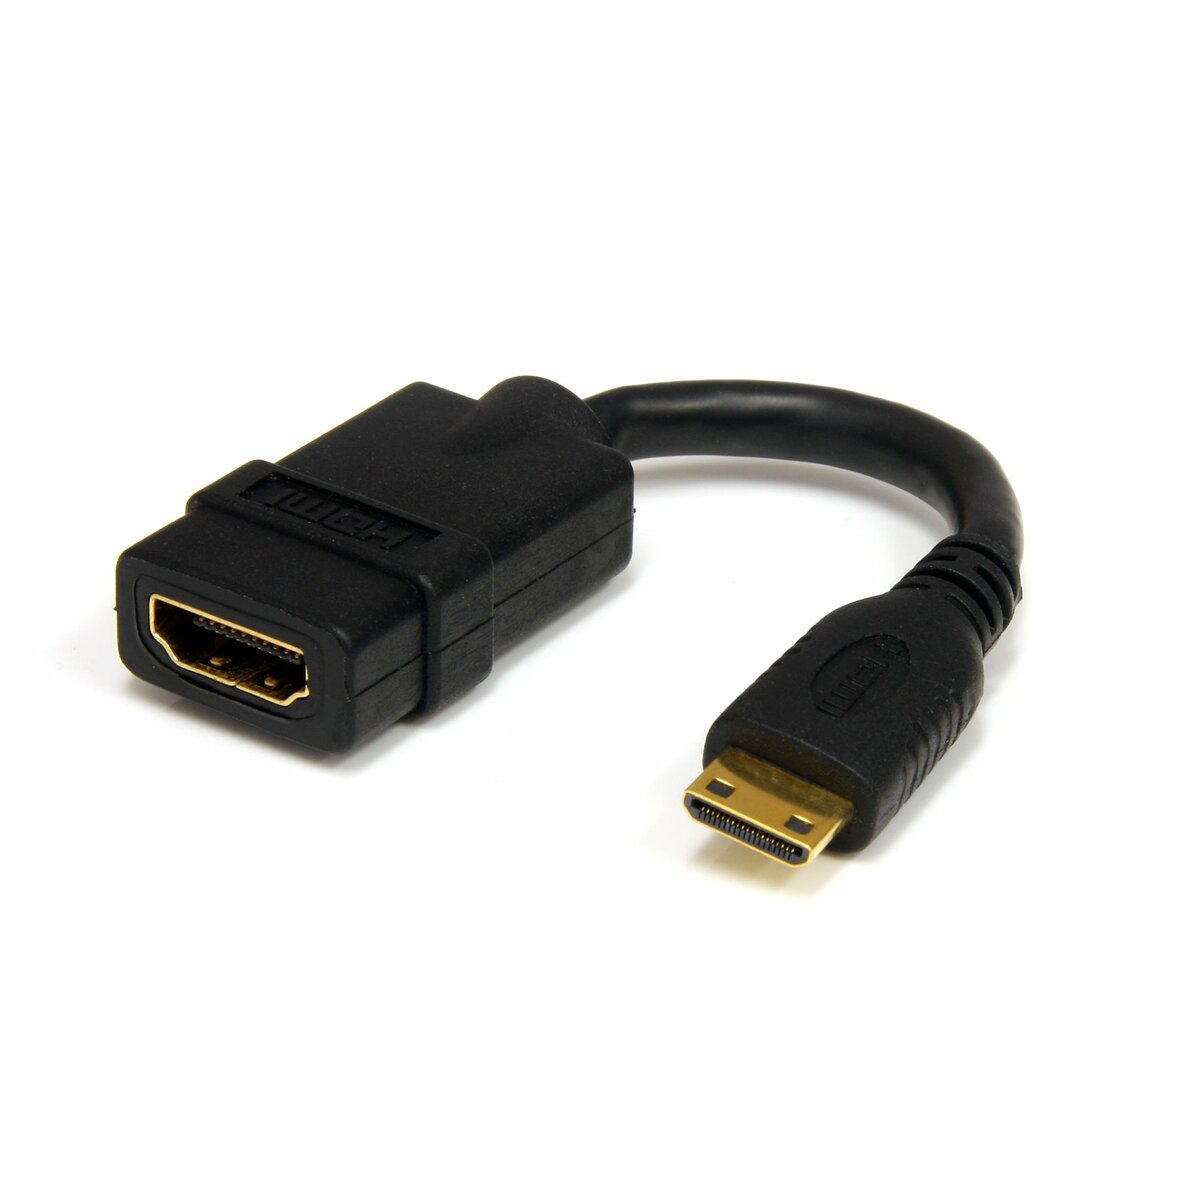 StarTech.com 0.3m 1ft Short High Speed HDMI Cable - Ultra HD 4k x 2k HDMI  Cable - HDMI M/M - 30cm HDMI 1.4 Cable - Audio/Video Gold-Plated (HDMM30CM)  - HDMI cable - 1ft